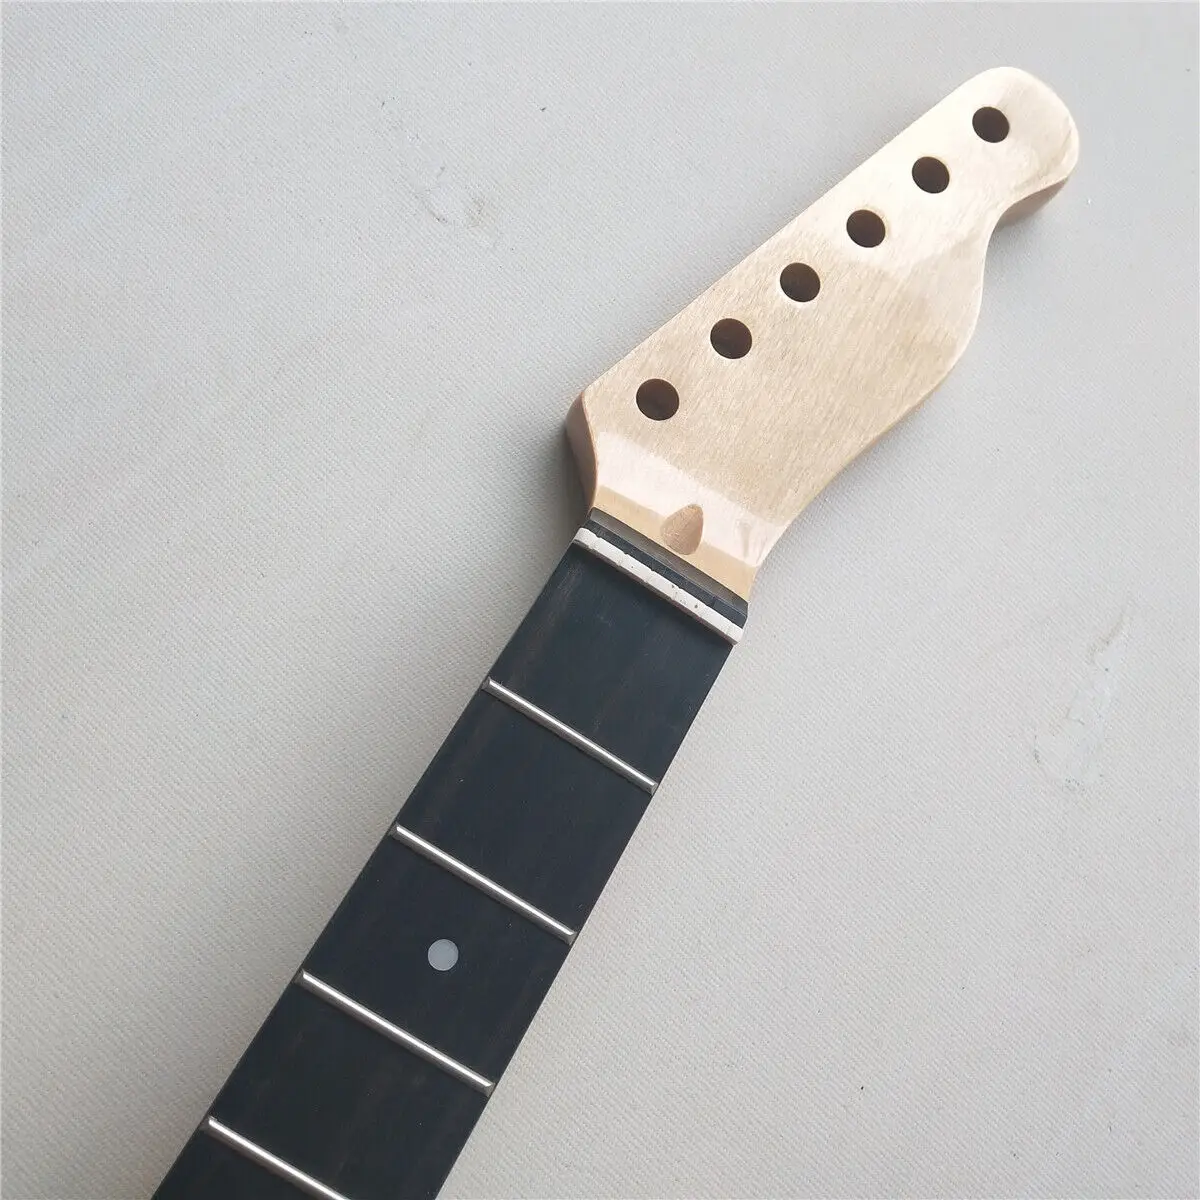 Enlarge DIY ebony Fingerboard Dot Inlay Guitar Neck 22fret 25.5inch Guitar TL part Gloss New Replacement